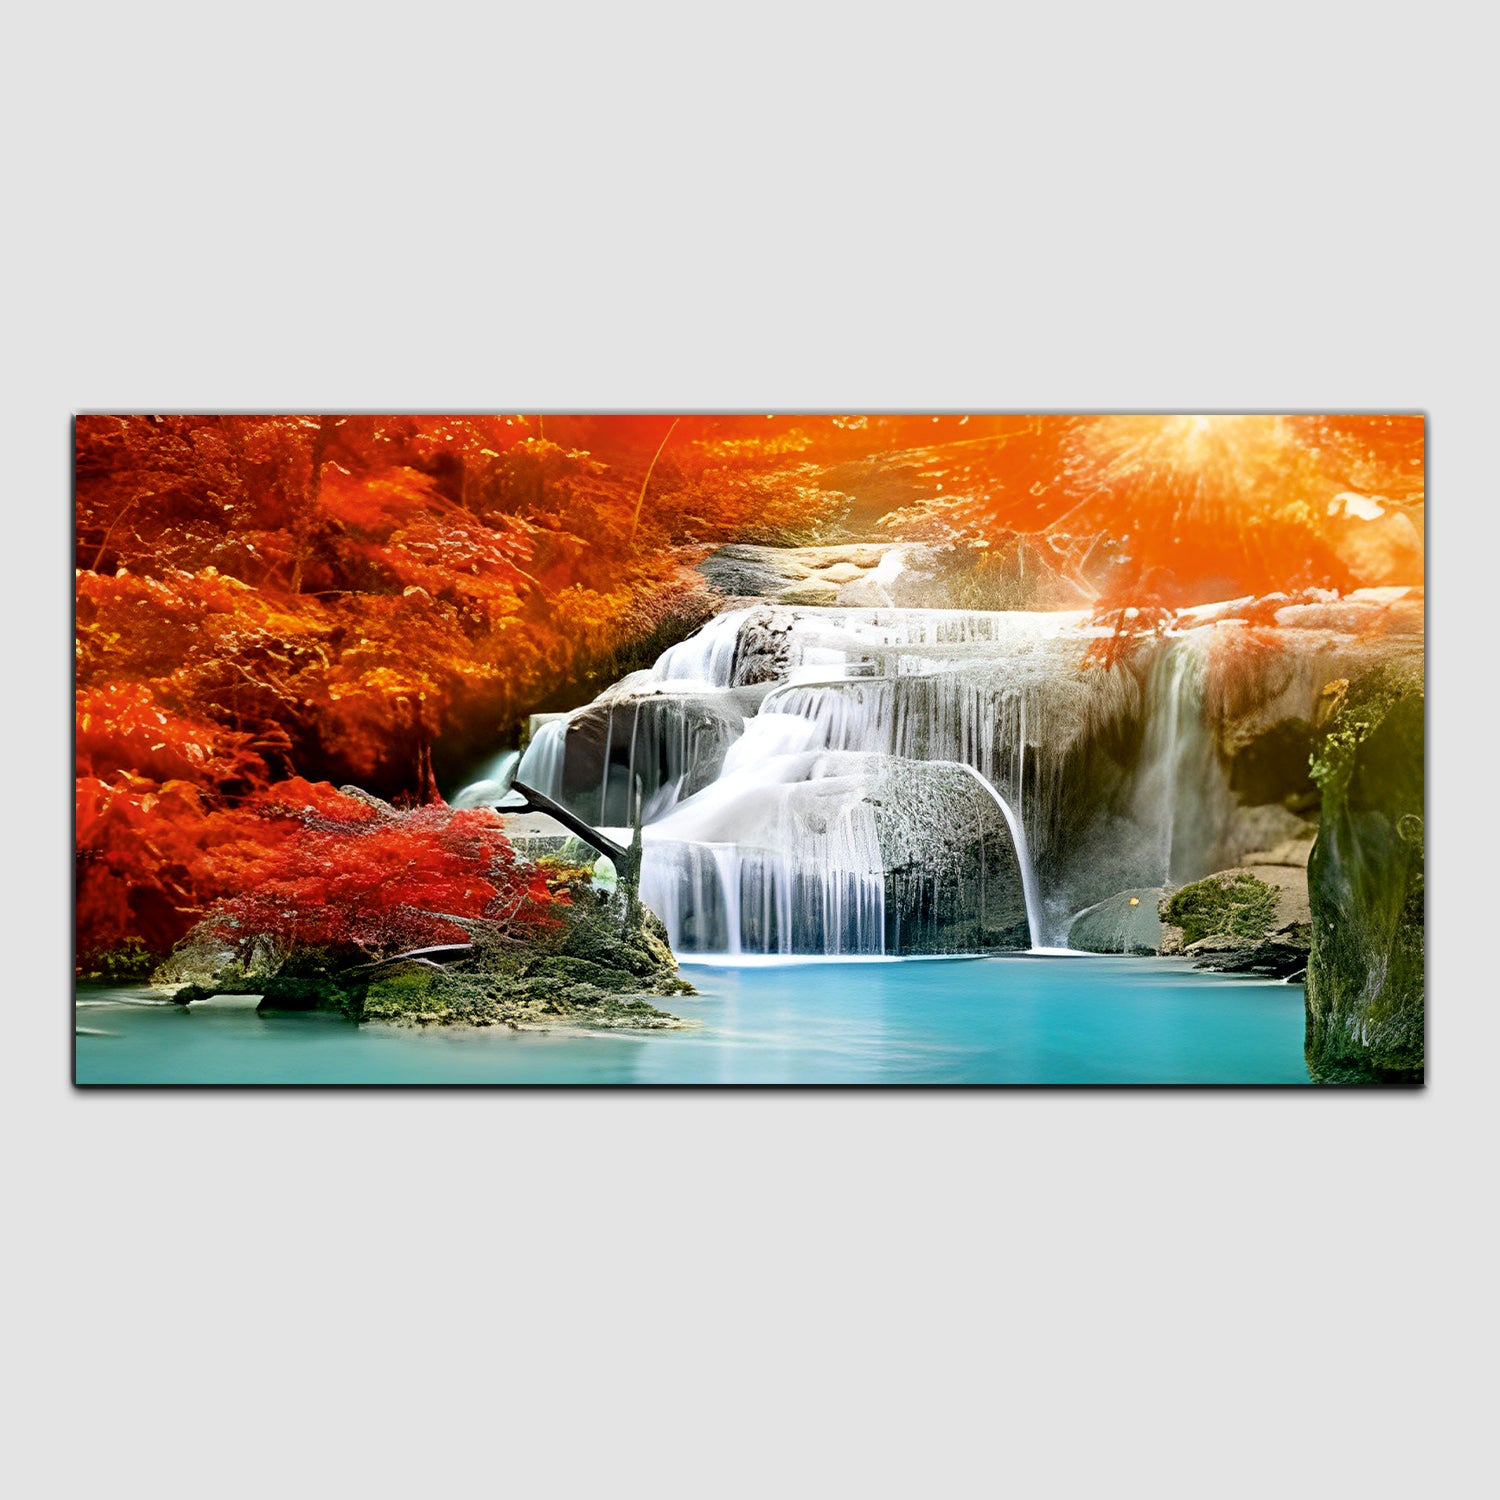 Waterfall Nature Landscape with Wooden Frame Canvas Wall Painting